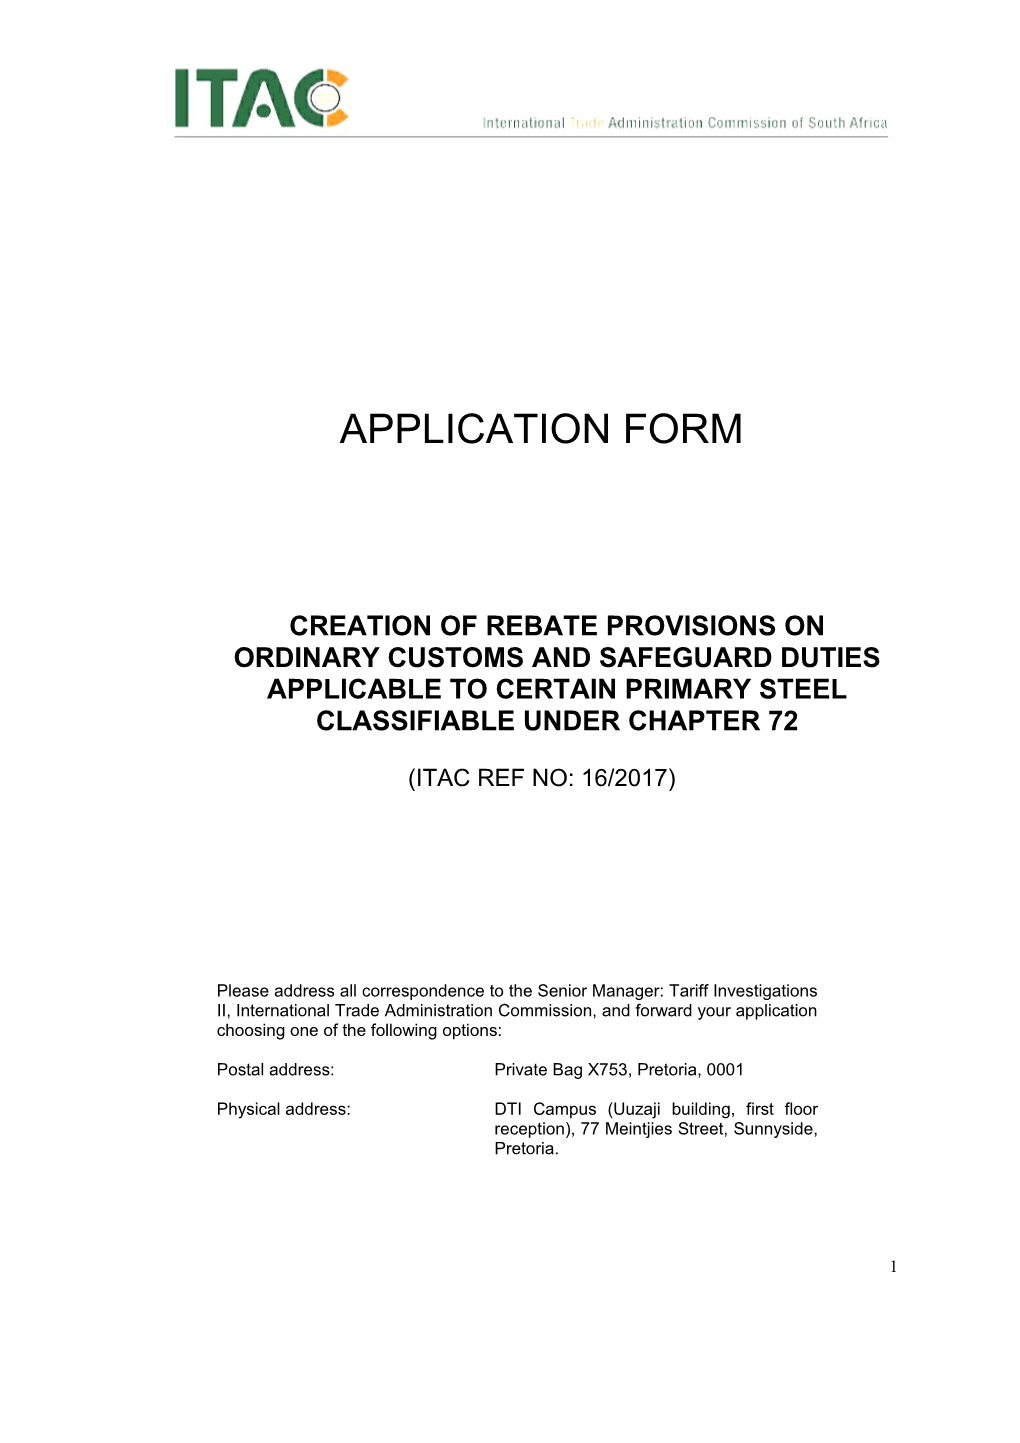 Creation of Rebate Provisions on Ordinary Customs and Safeguard Duties Applicable to Certain